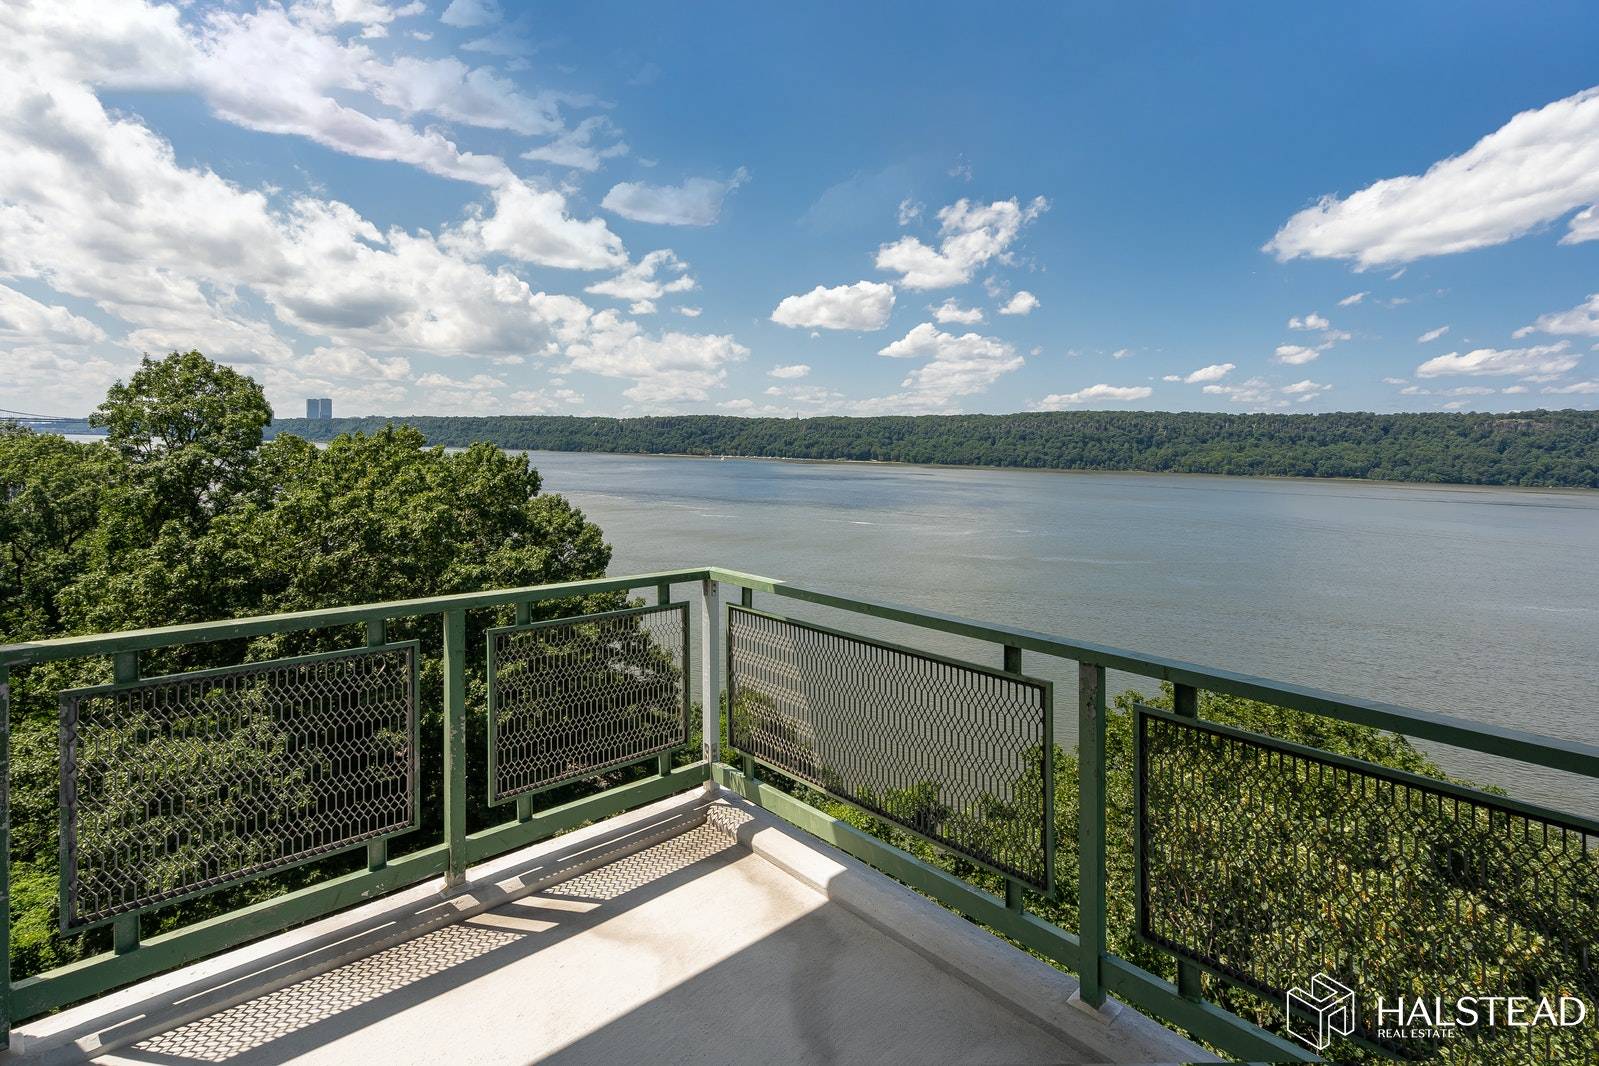 Rarely available, A fabulous Riverfront 3 bedroom 2 full bath, approximately 1700 square foot home plus a large balcony.